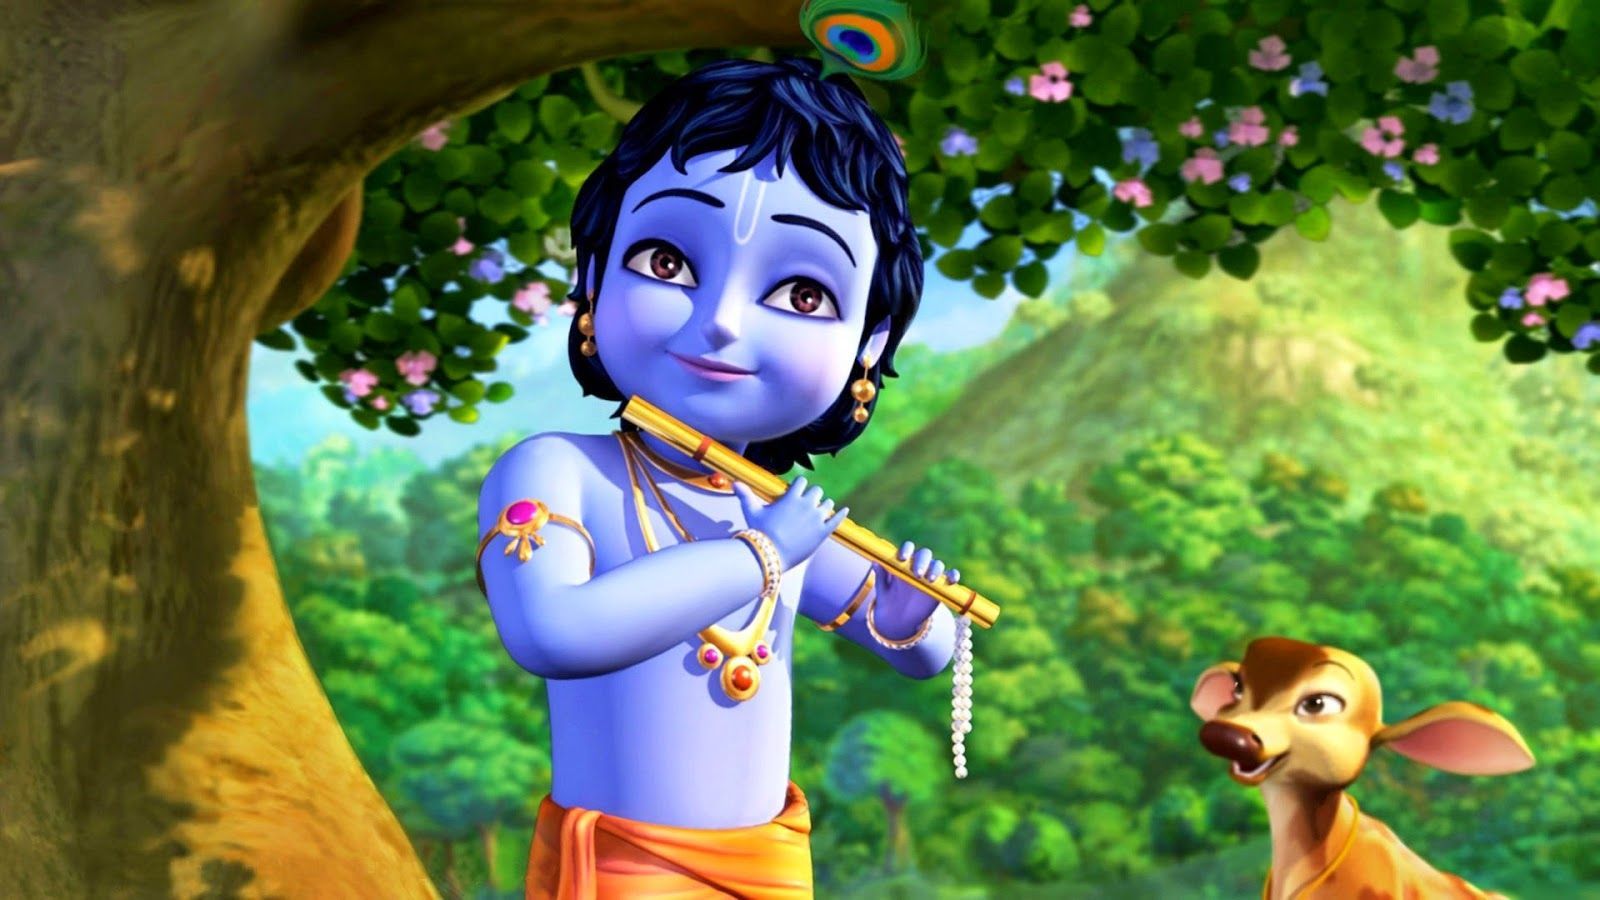 Download Cute Little Krishna Photos Pictures Images DP for WhatsApp